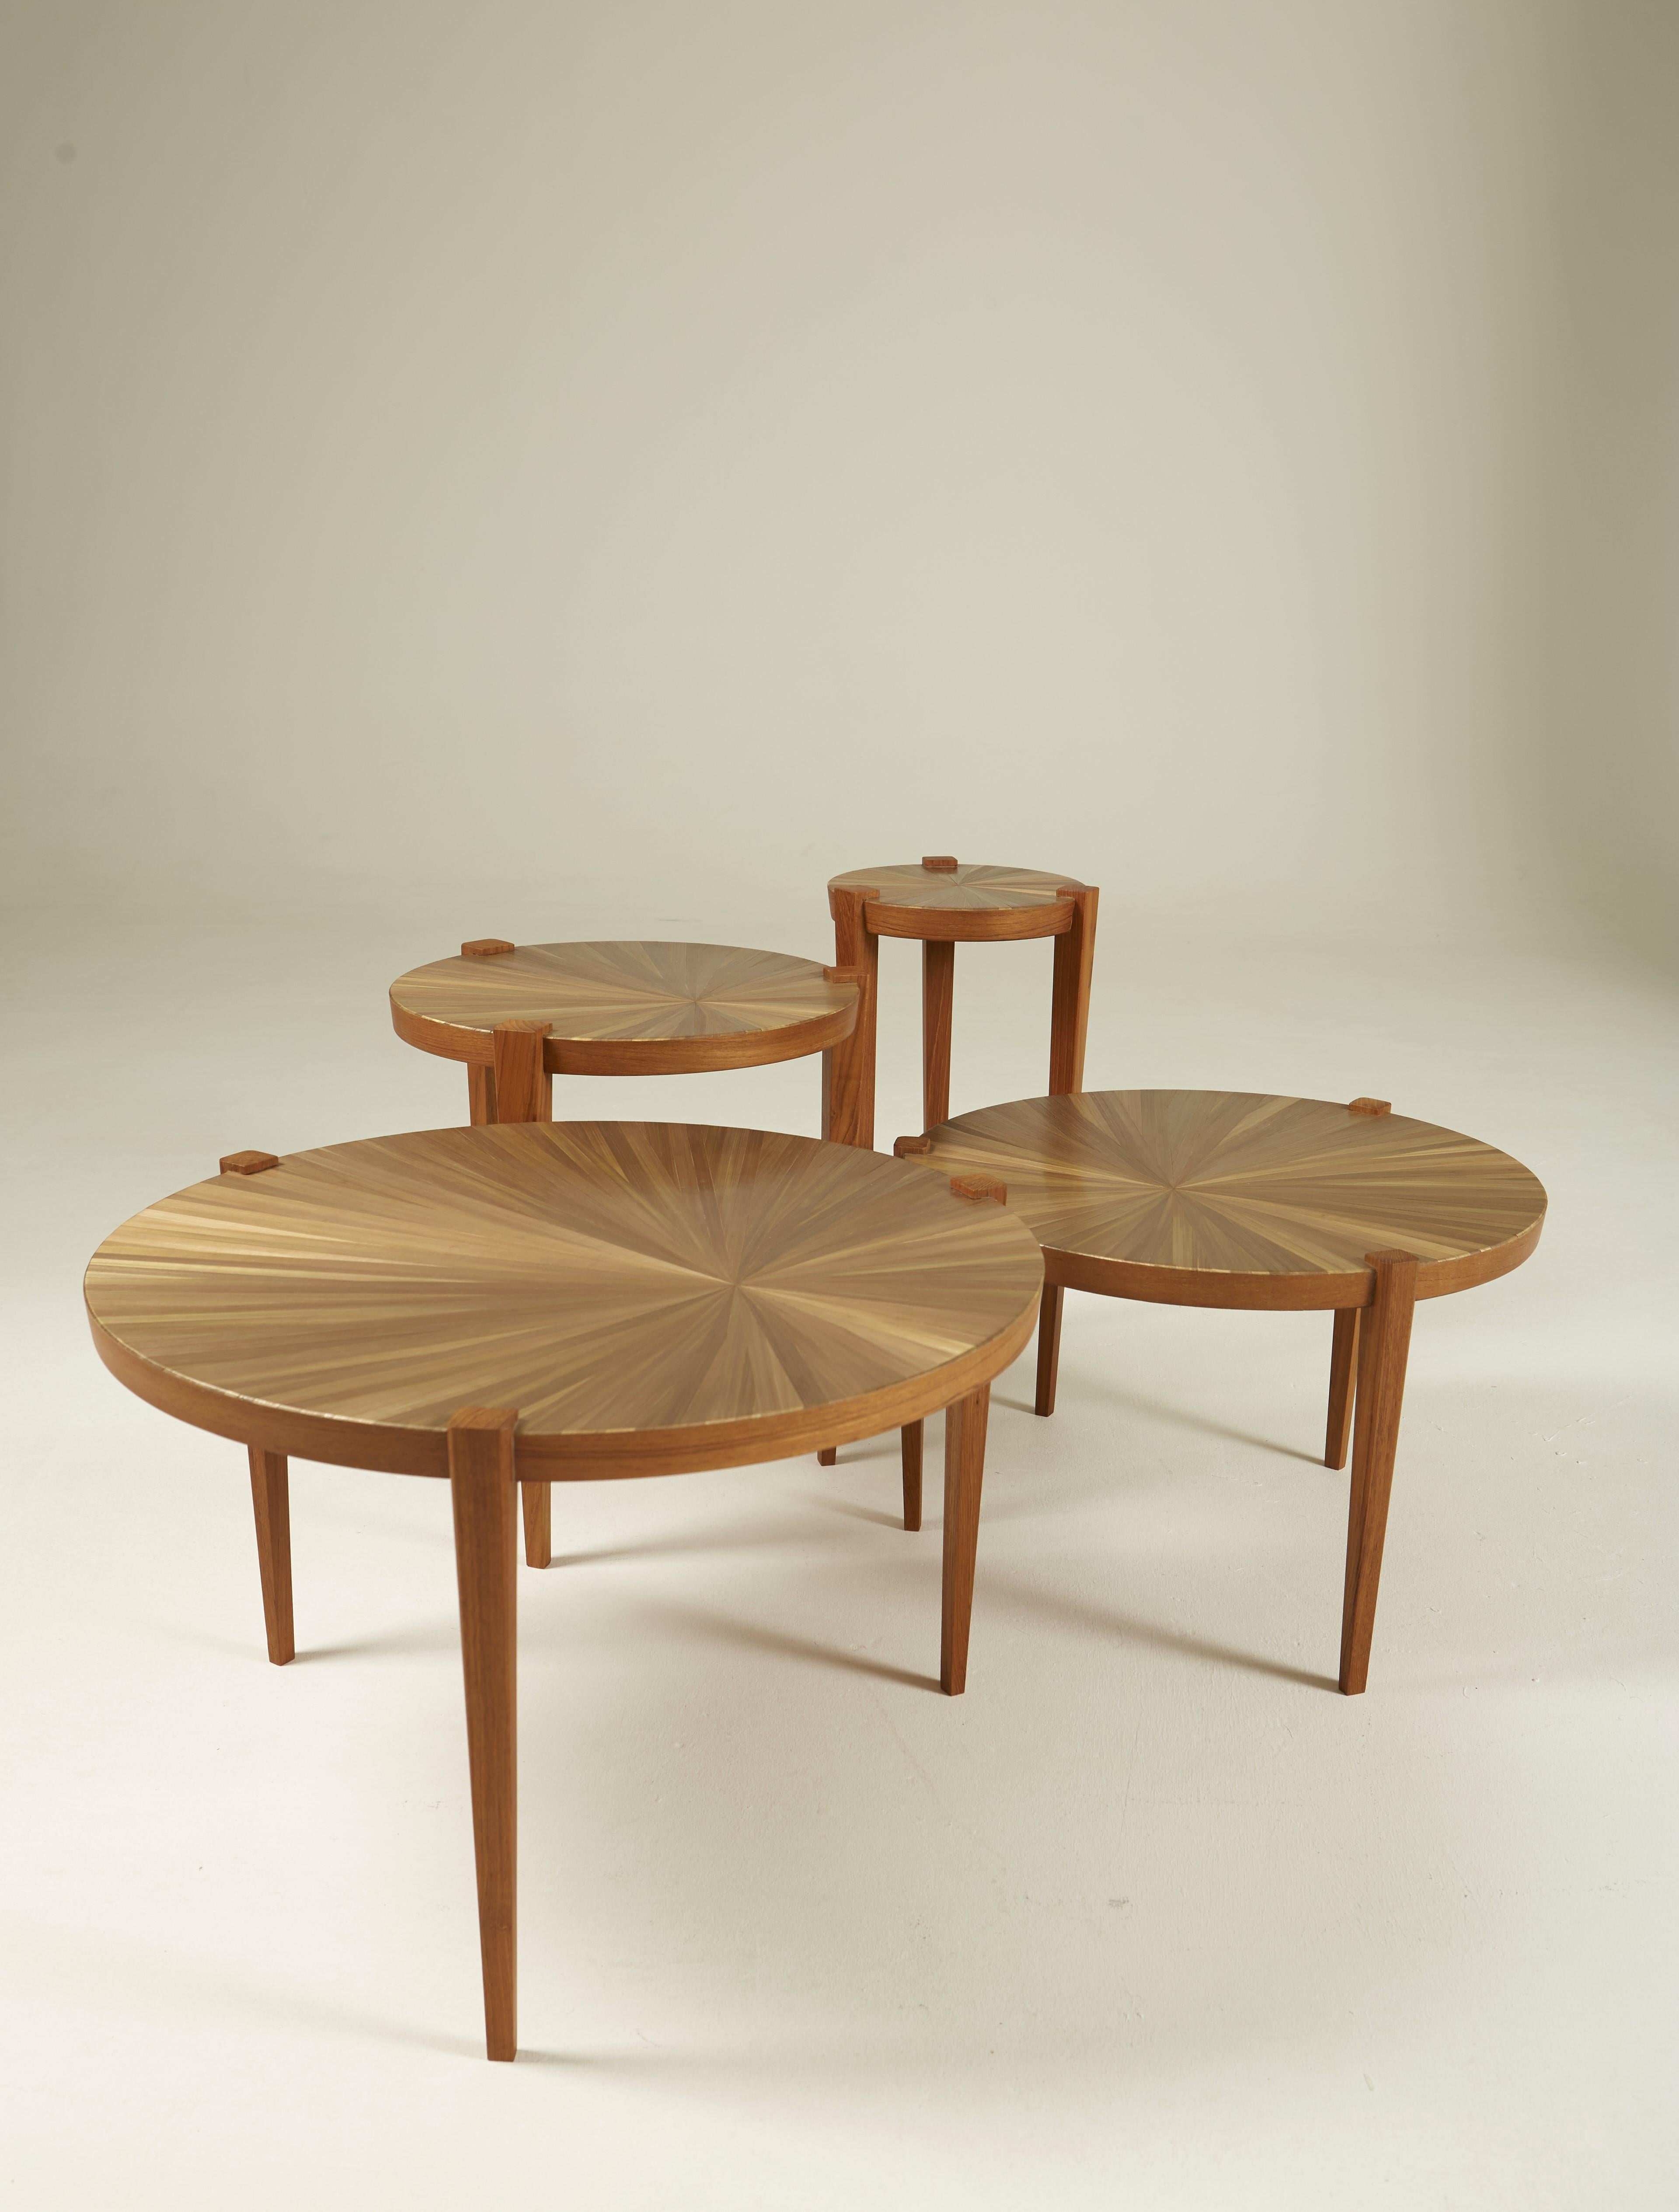 Set of 4 side tables in solid teak and teak veneer, tops inlaid with straw with a sun motif. Variable dimensions. Exceptional furniture - unique pieces.